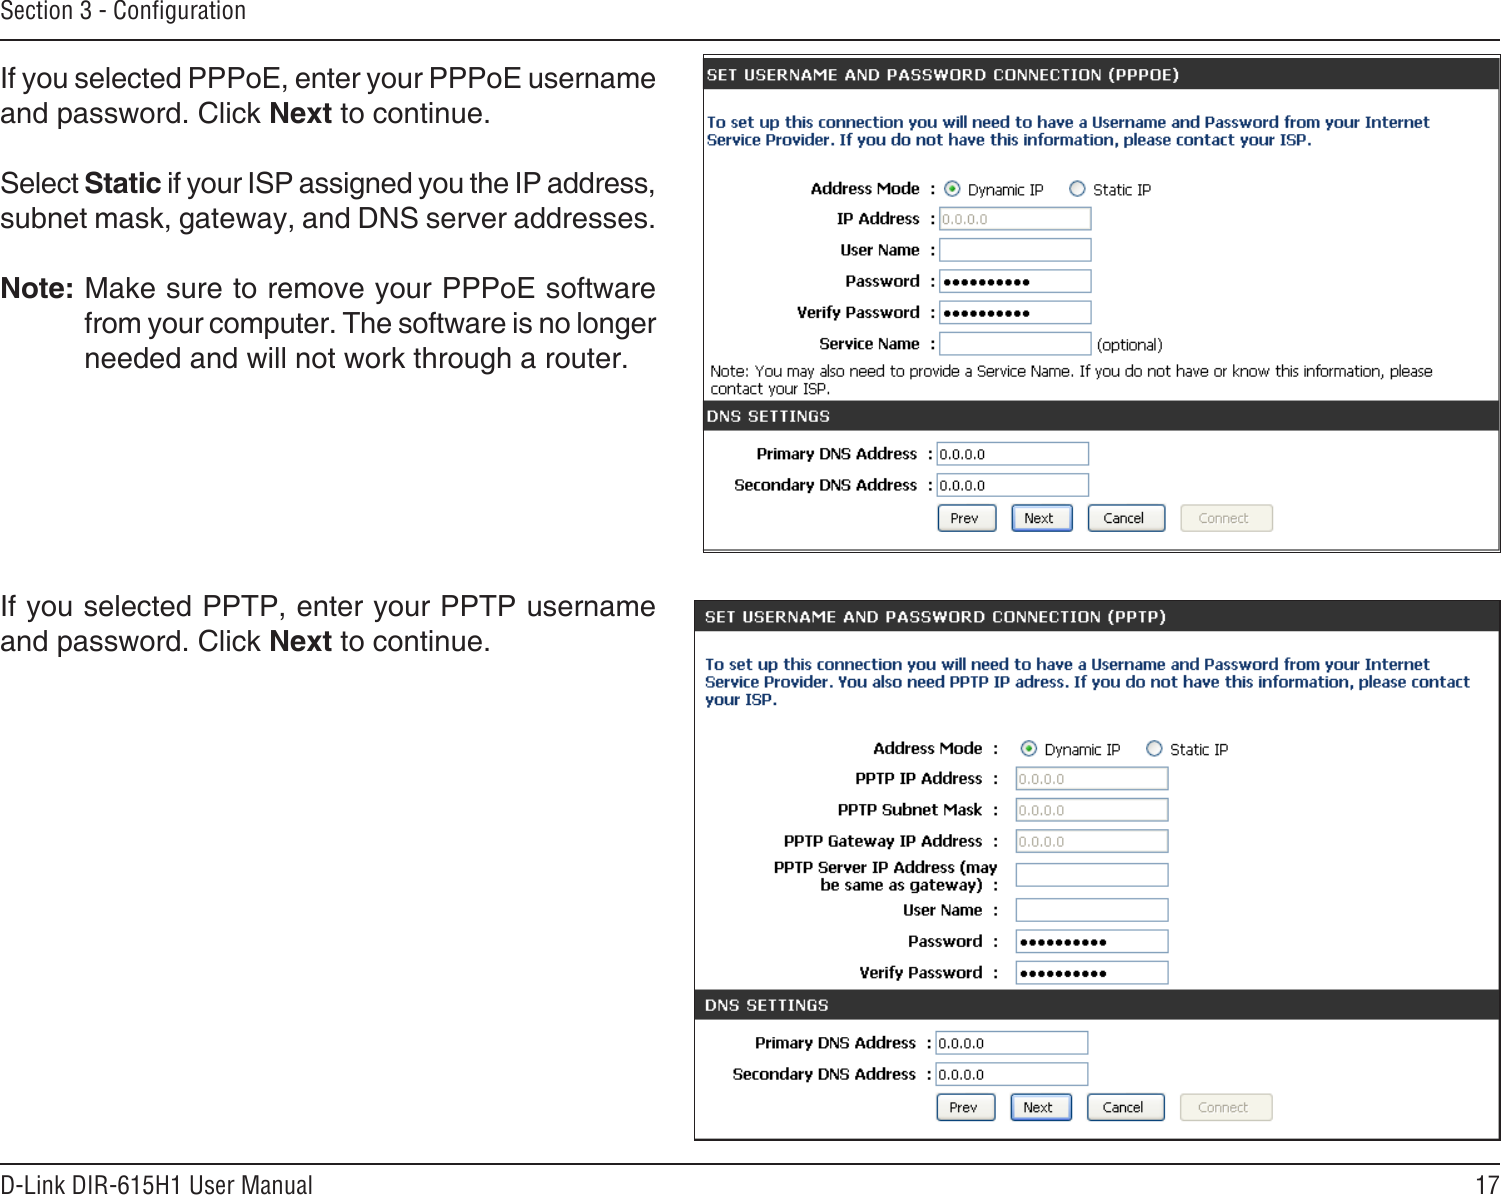 17D-Link DIR-615H1 User ManualSection 3 - CongurationIf you selected PPTP, enter your PPTP username and password. Click Next to continue.If you selected PPPoE, enter your PPPoE username and password. Click Next to continue.Select Static if your ISP assigned you the IP address, subnet mask, gateway, and DNS server addresses.Note: Make sure to remove your PPPoE software from your computer. The software is no longer needed and will not work through a router.